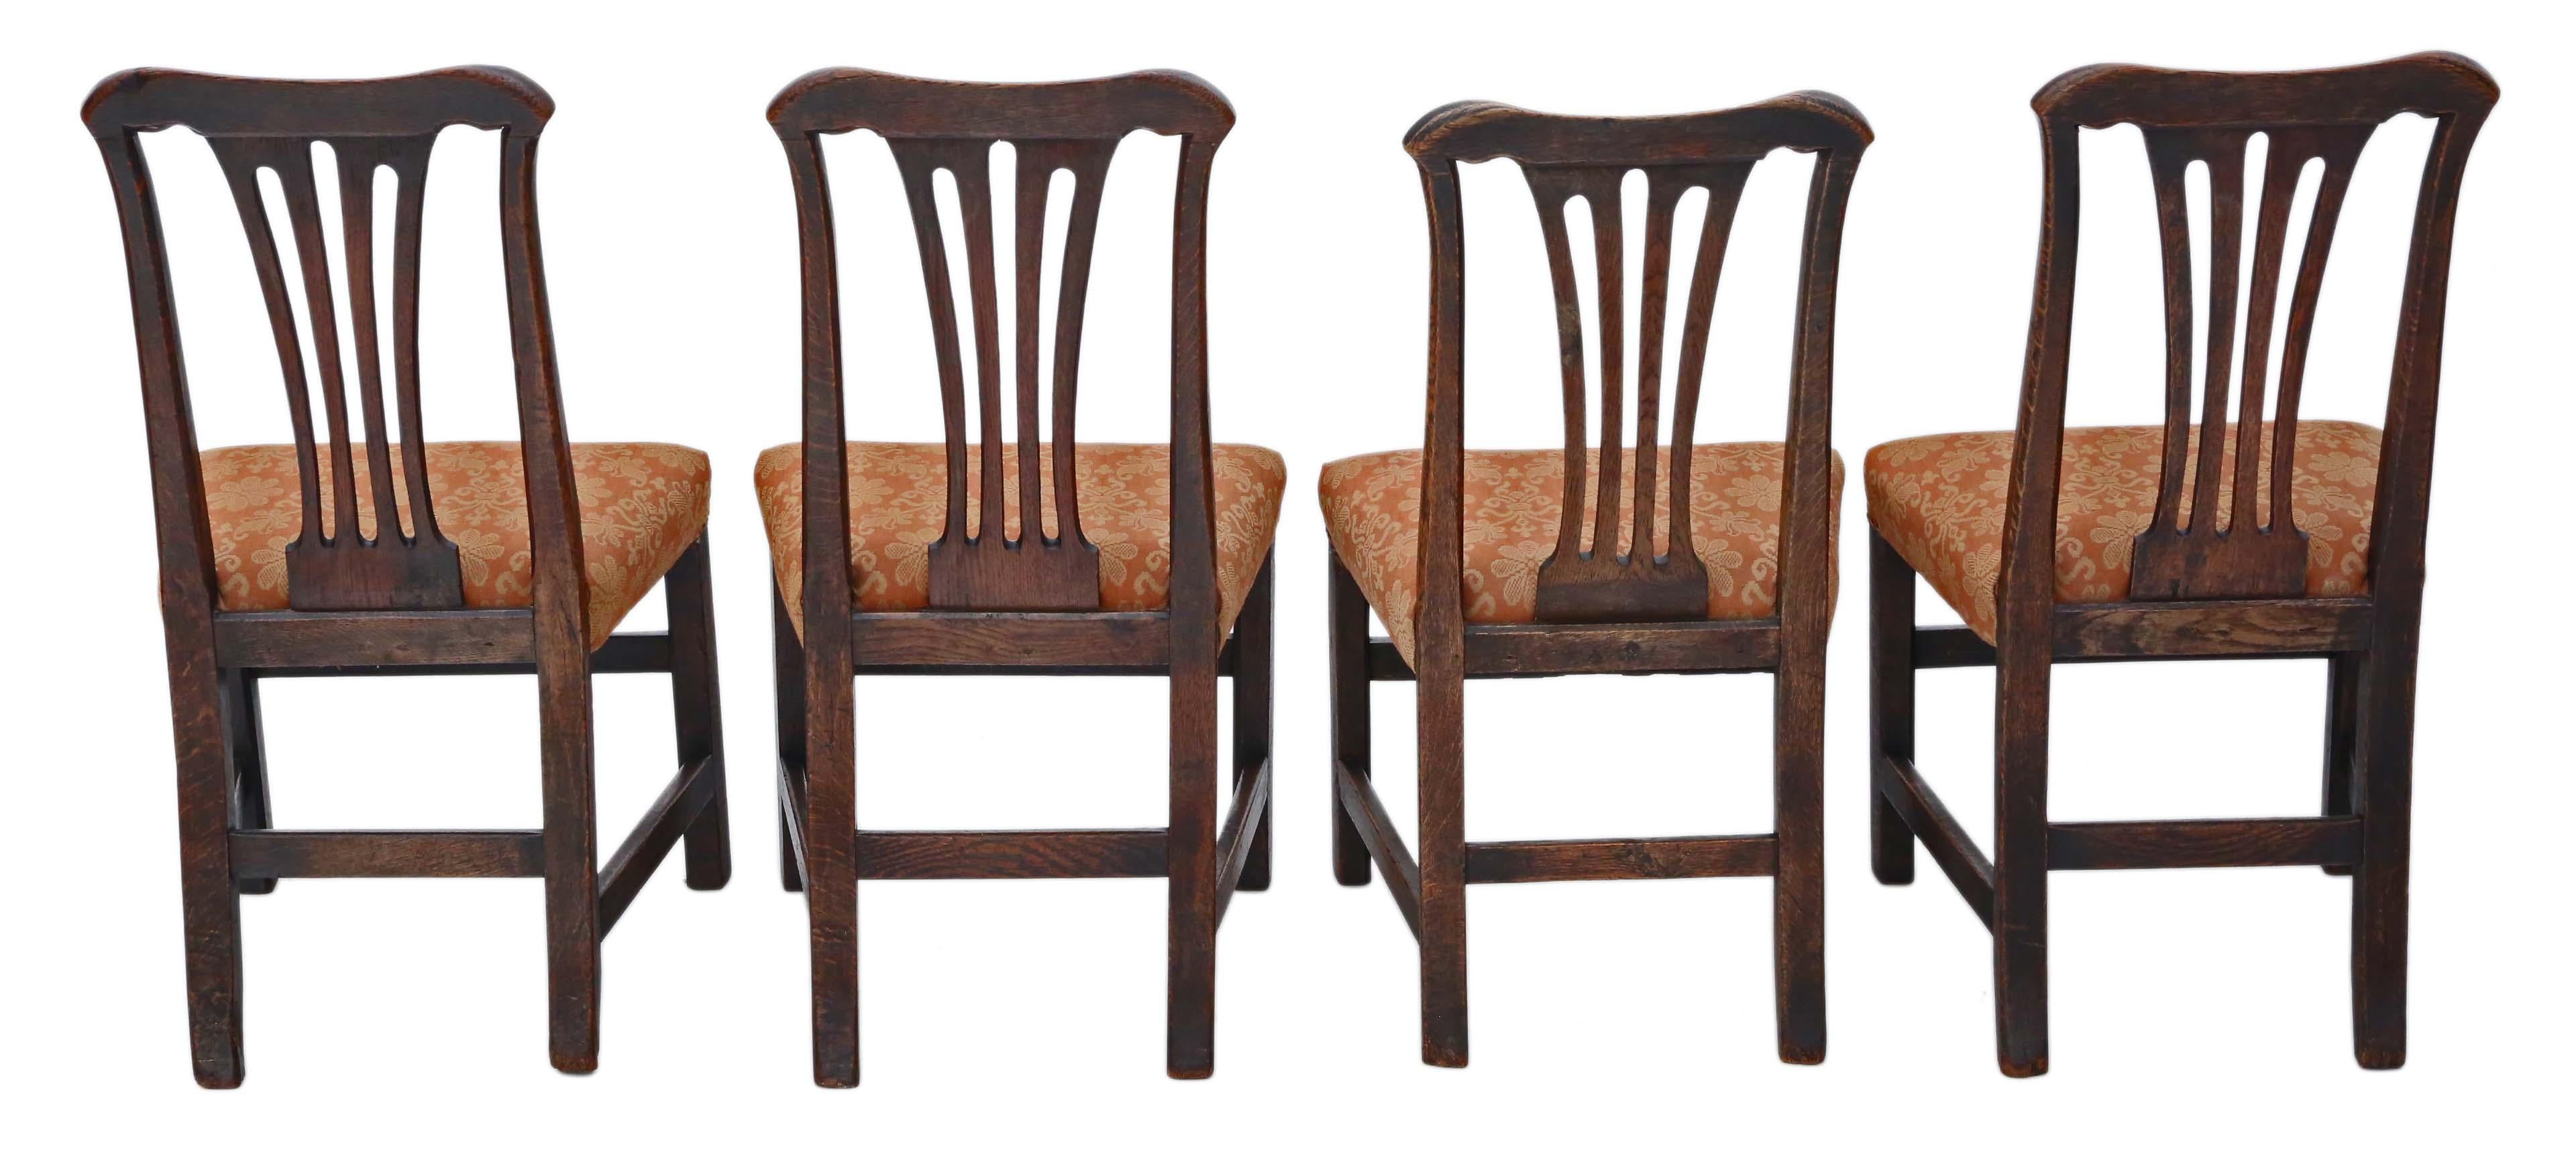 Antique quality set of 4 Georgian oak dining chairs, circa 1800.
Solid, heavy and strong with no loose joints. Lovely simple elegant design.
Recent upholstery with only minor signs of use, no major marks. If required, we can get chairs, such as